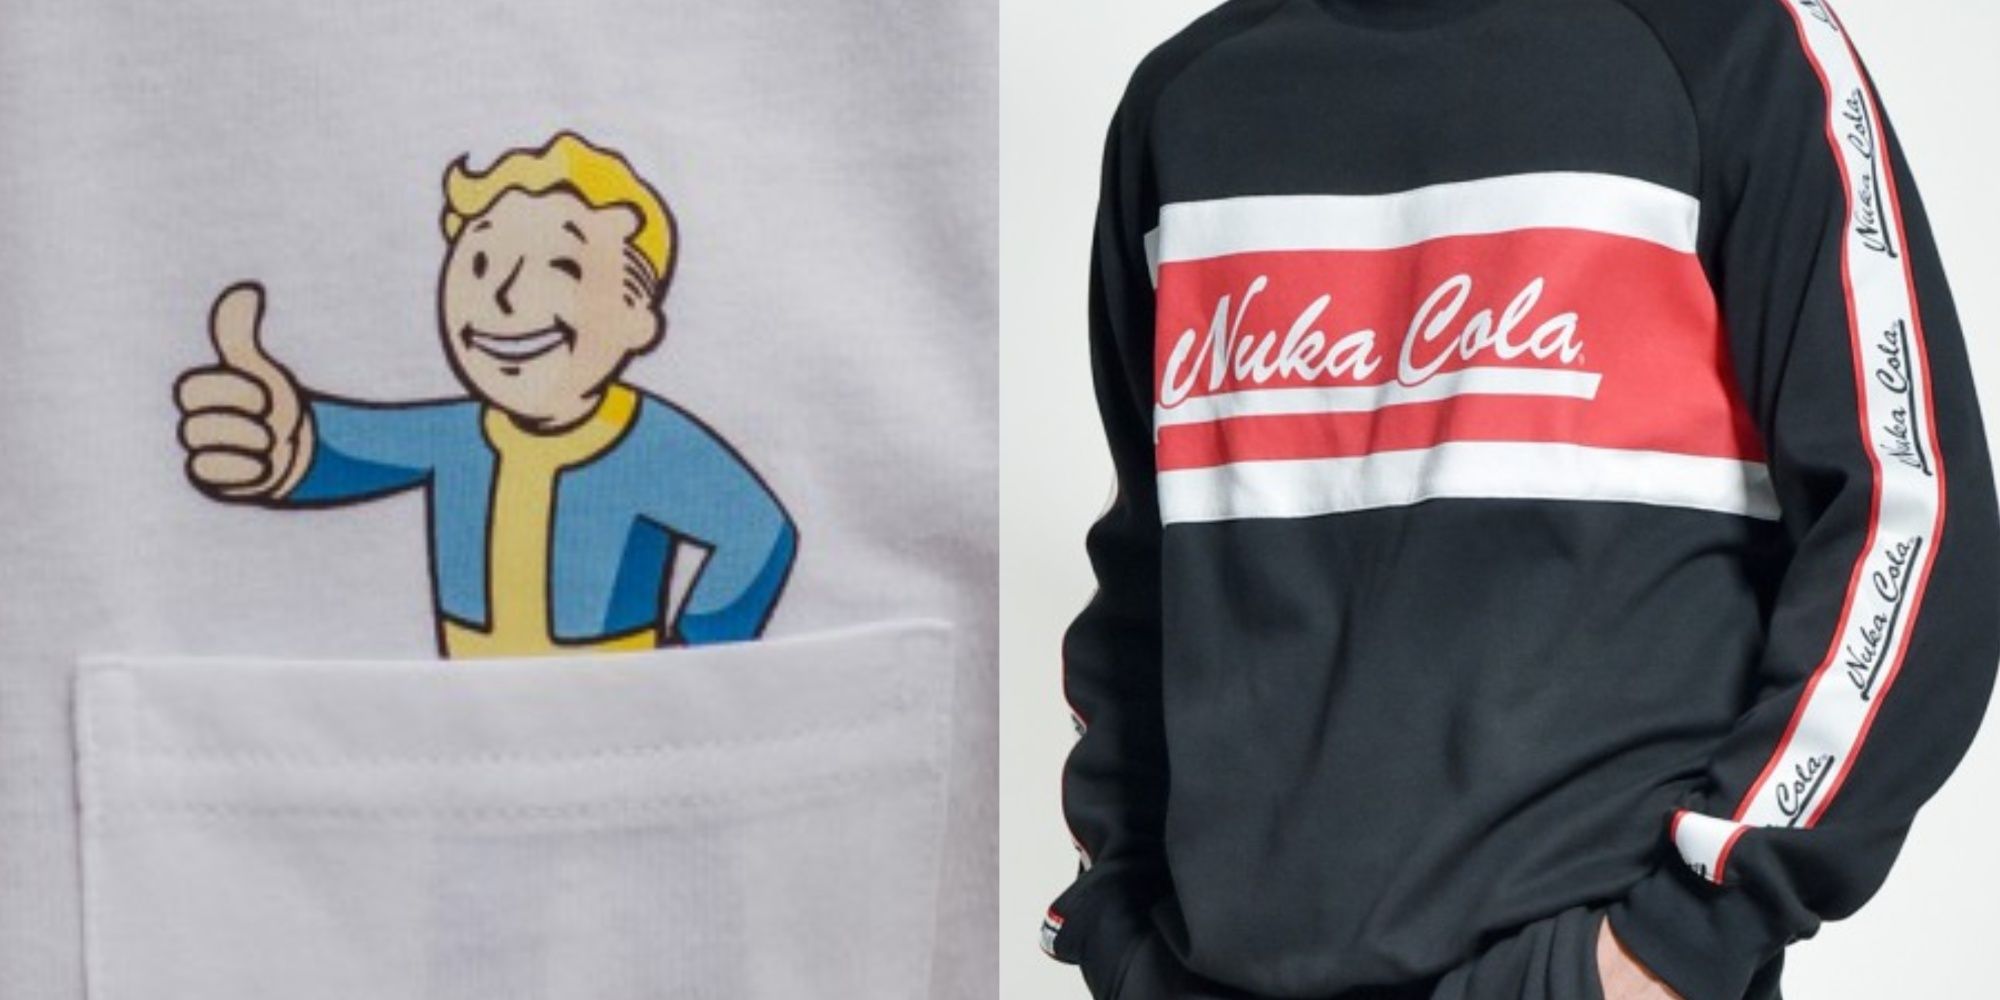 fallout's vault boy in a shirt pocket, and a nuka cola fallout sweater from insert coin